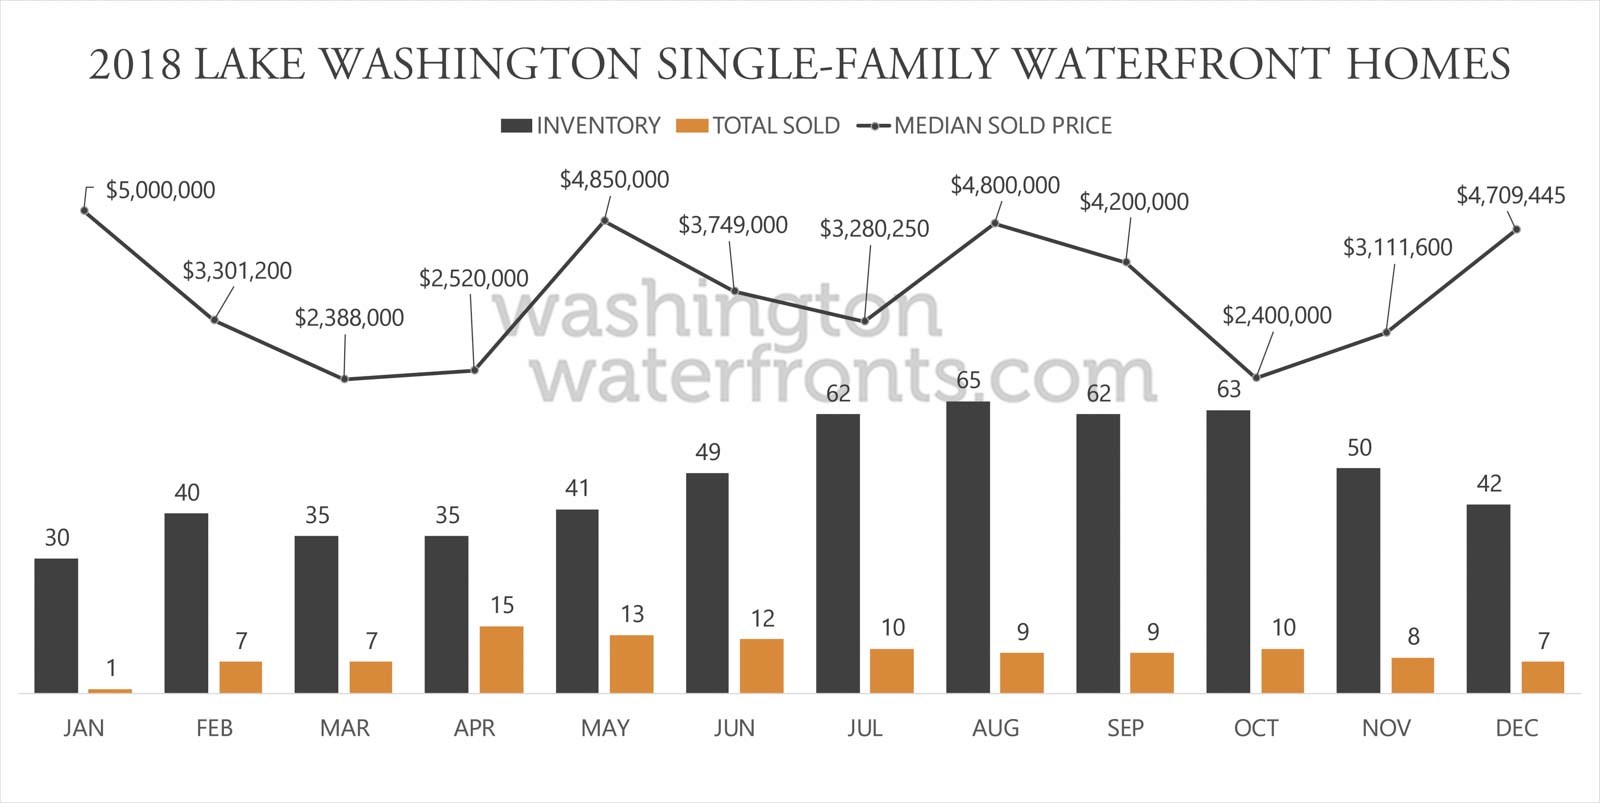 Lake Washington Waterfront Inventory, Number of Sales, and Median Sold Price